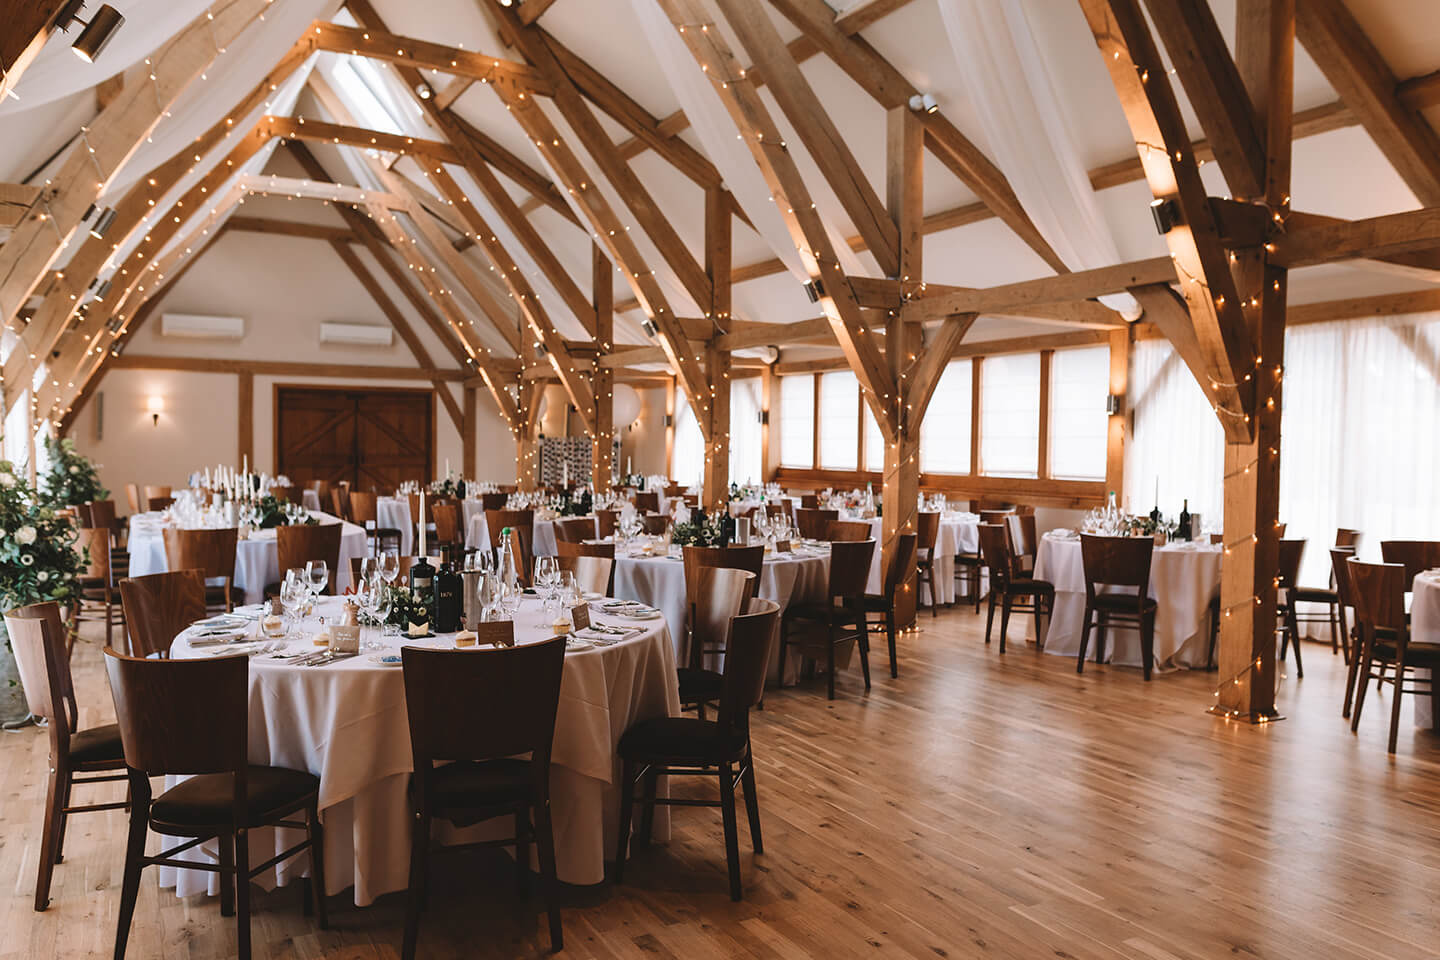 The Bridge Barn at Bassmead Manor Barns is adorned in fairy lights for a winter wedding